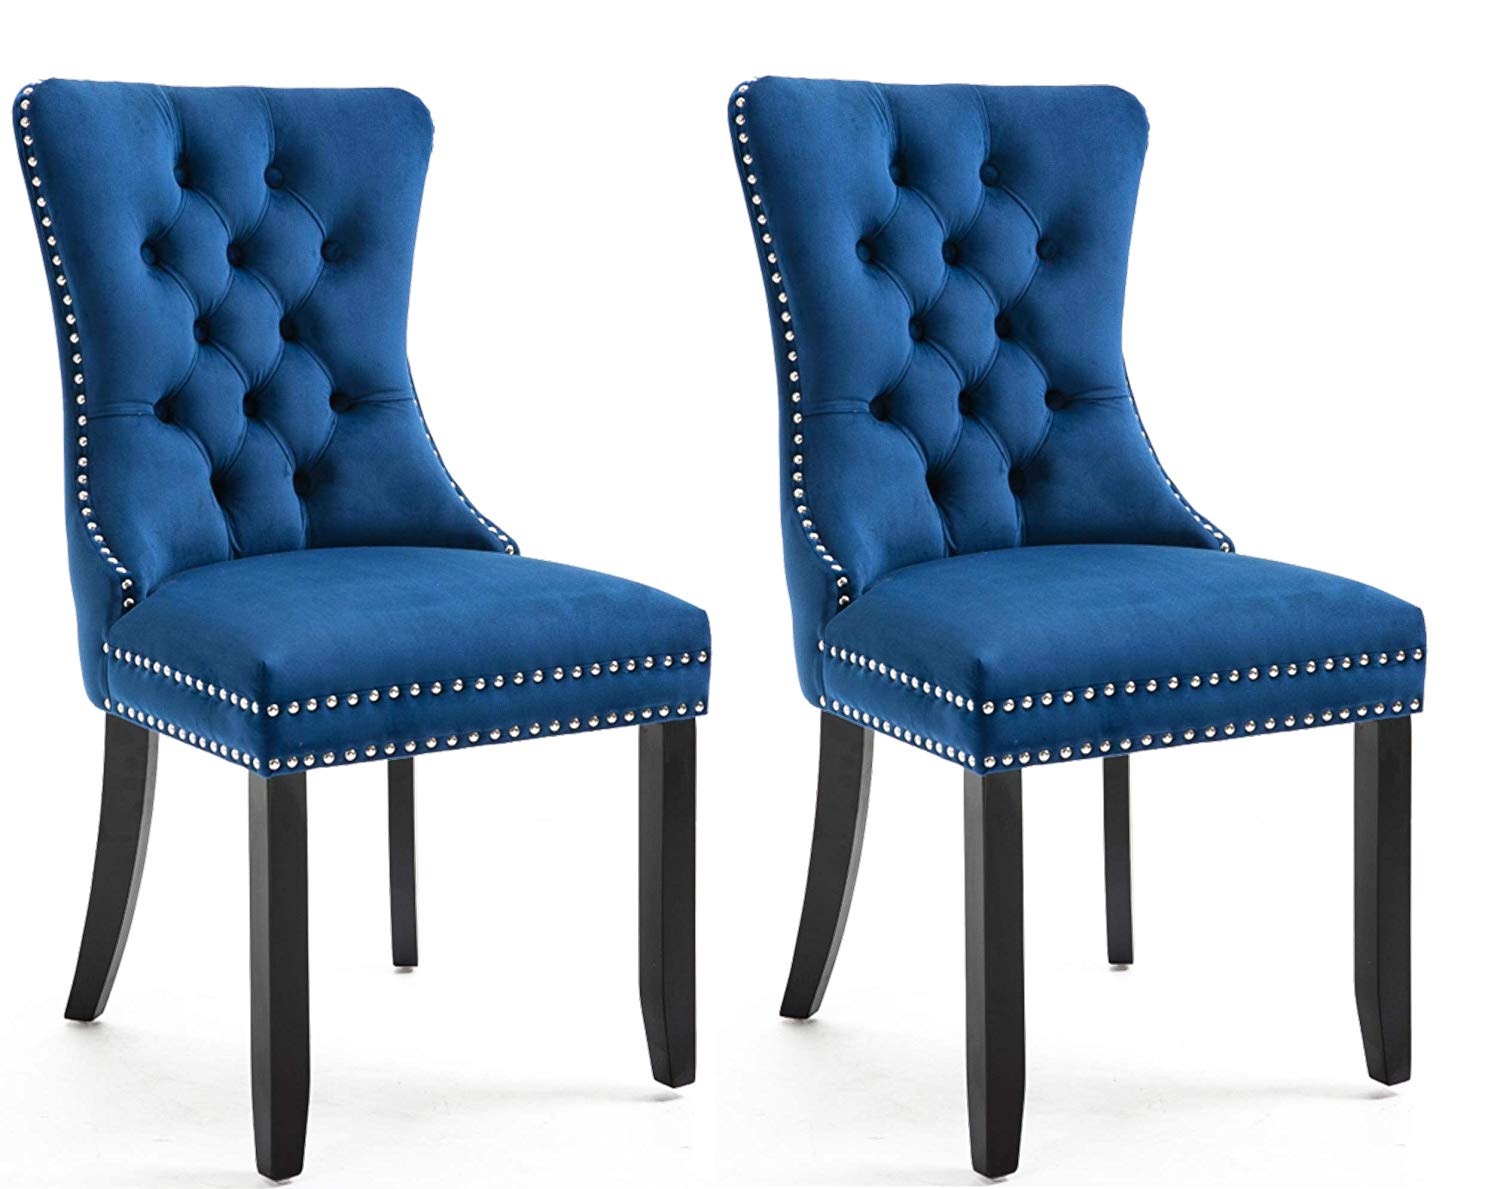 Navy Blue Upholstered Dining Room Chairs